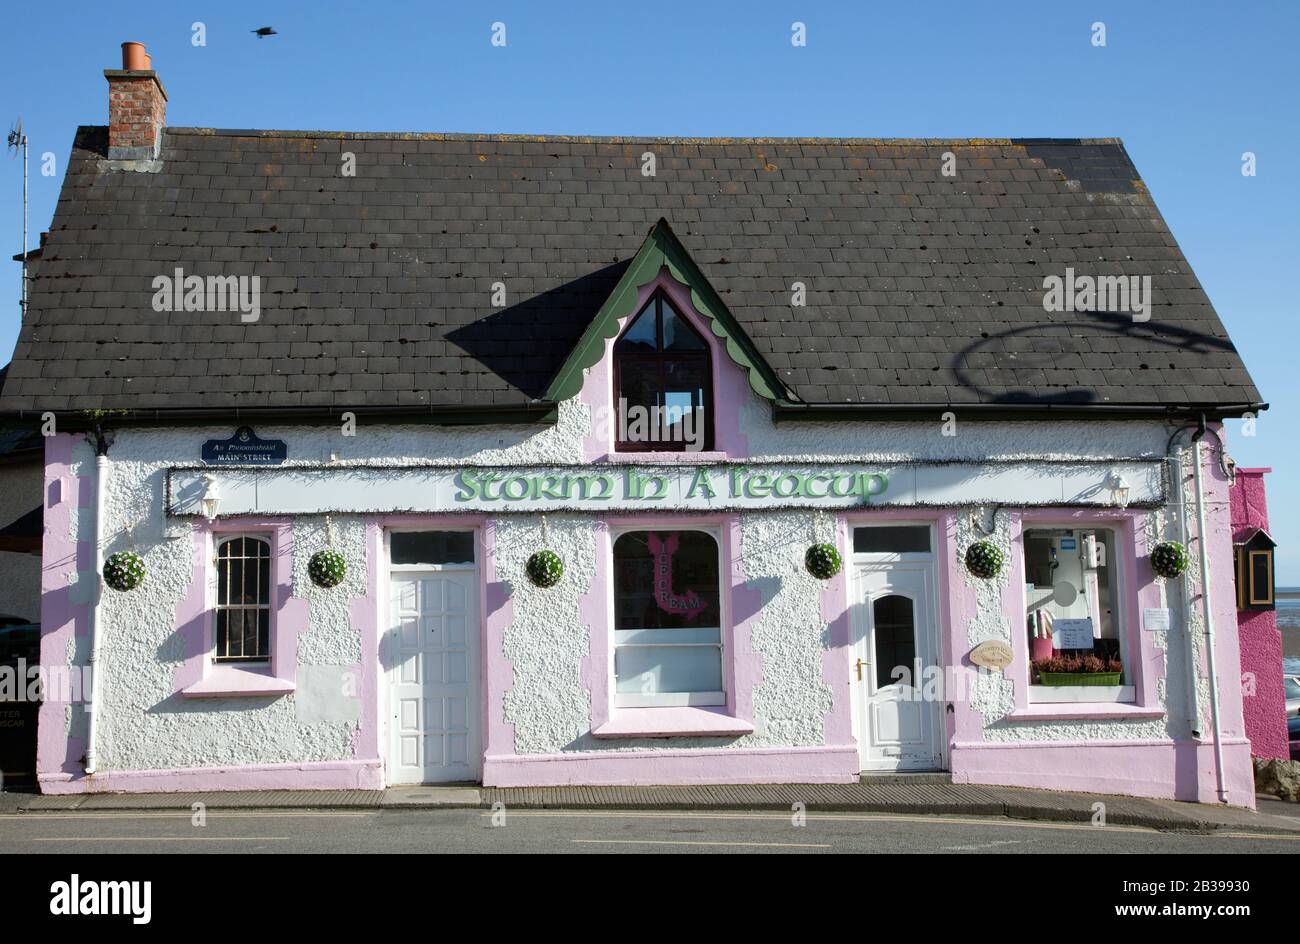 Stirm in a Teacup, seafront cafe, Main Street, Blackrock, County Louth, Ireland Stock Photo